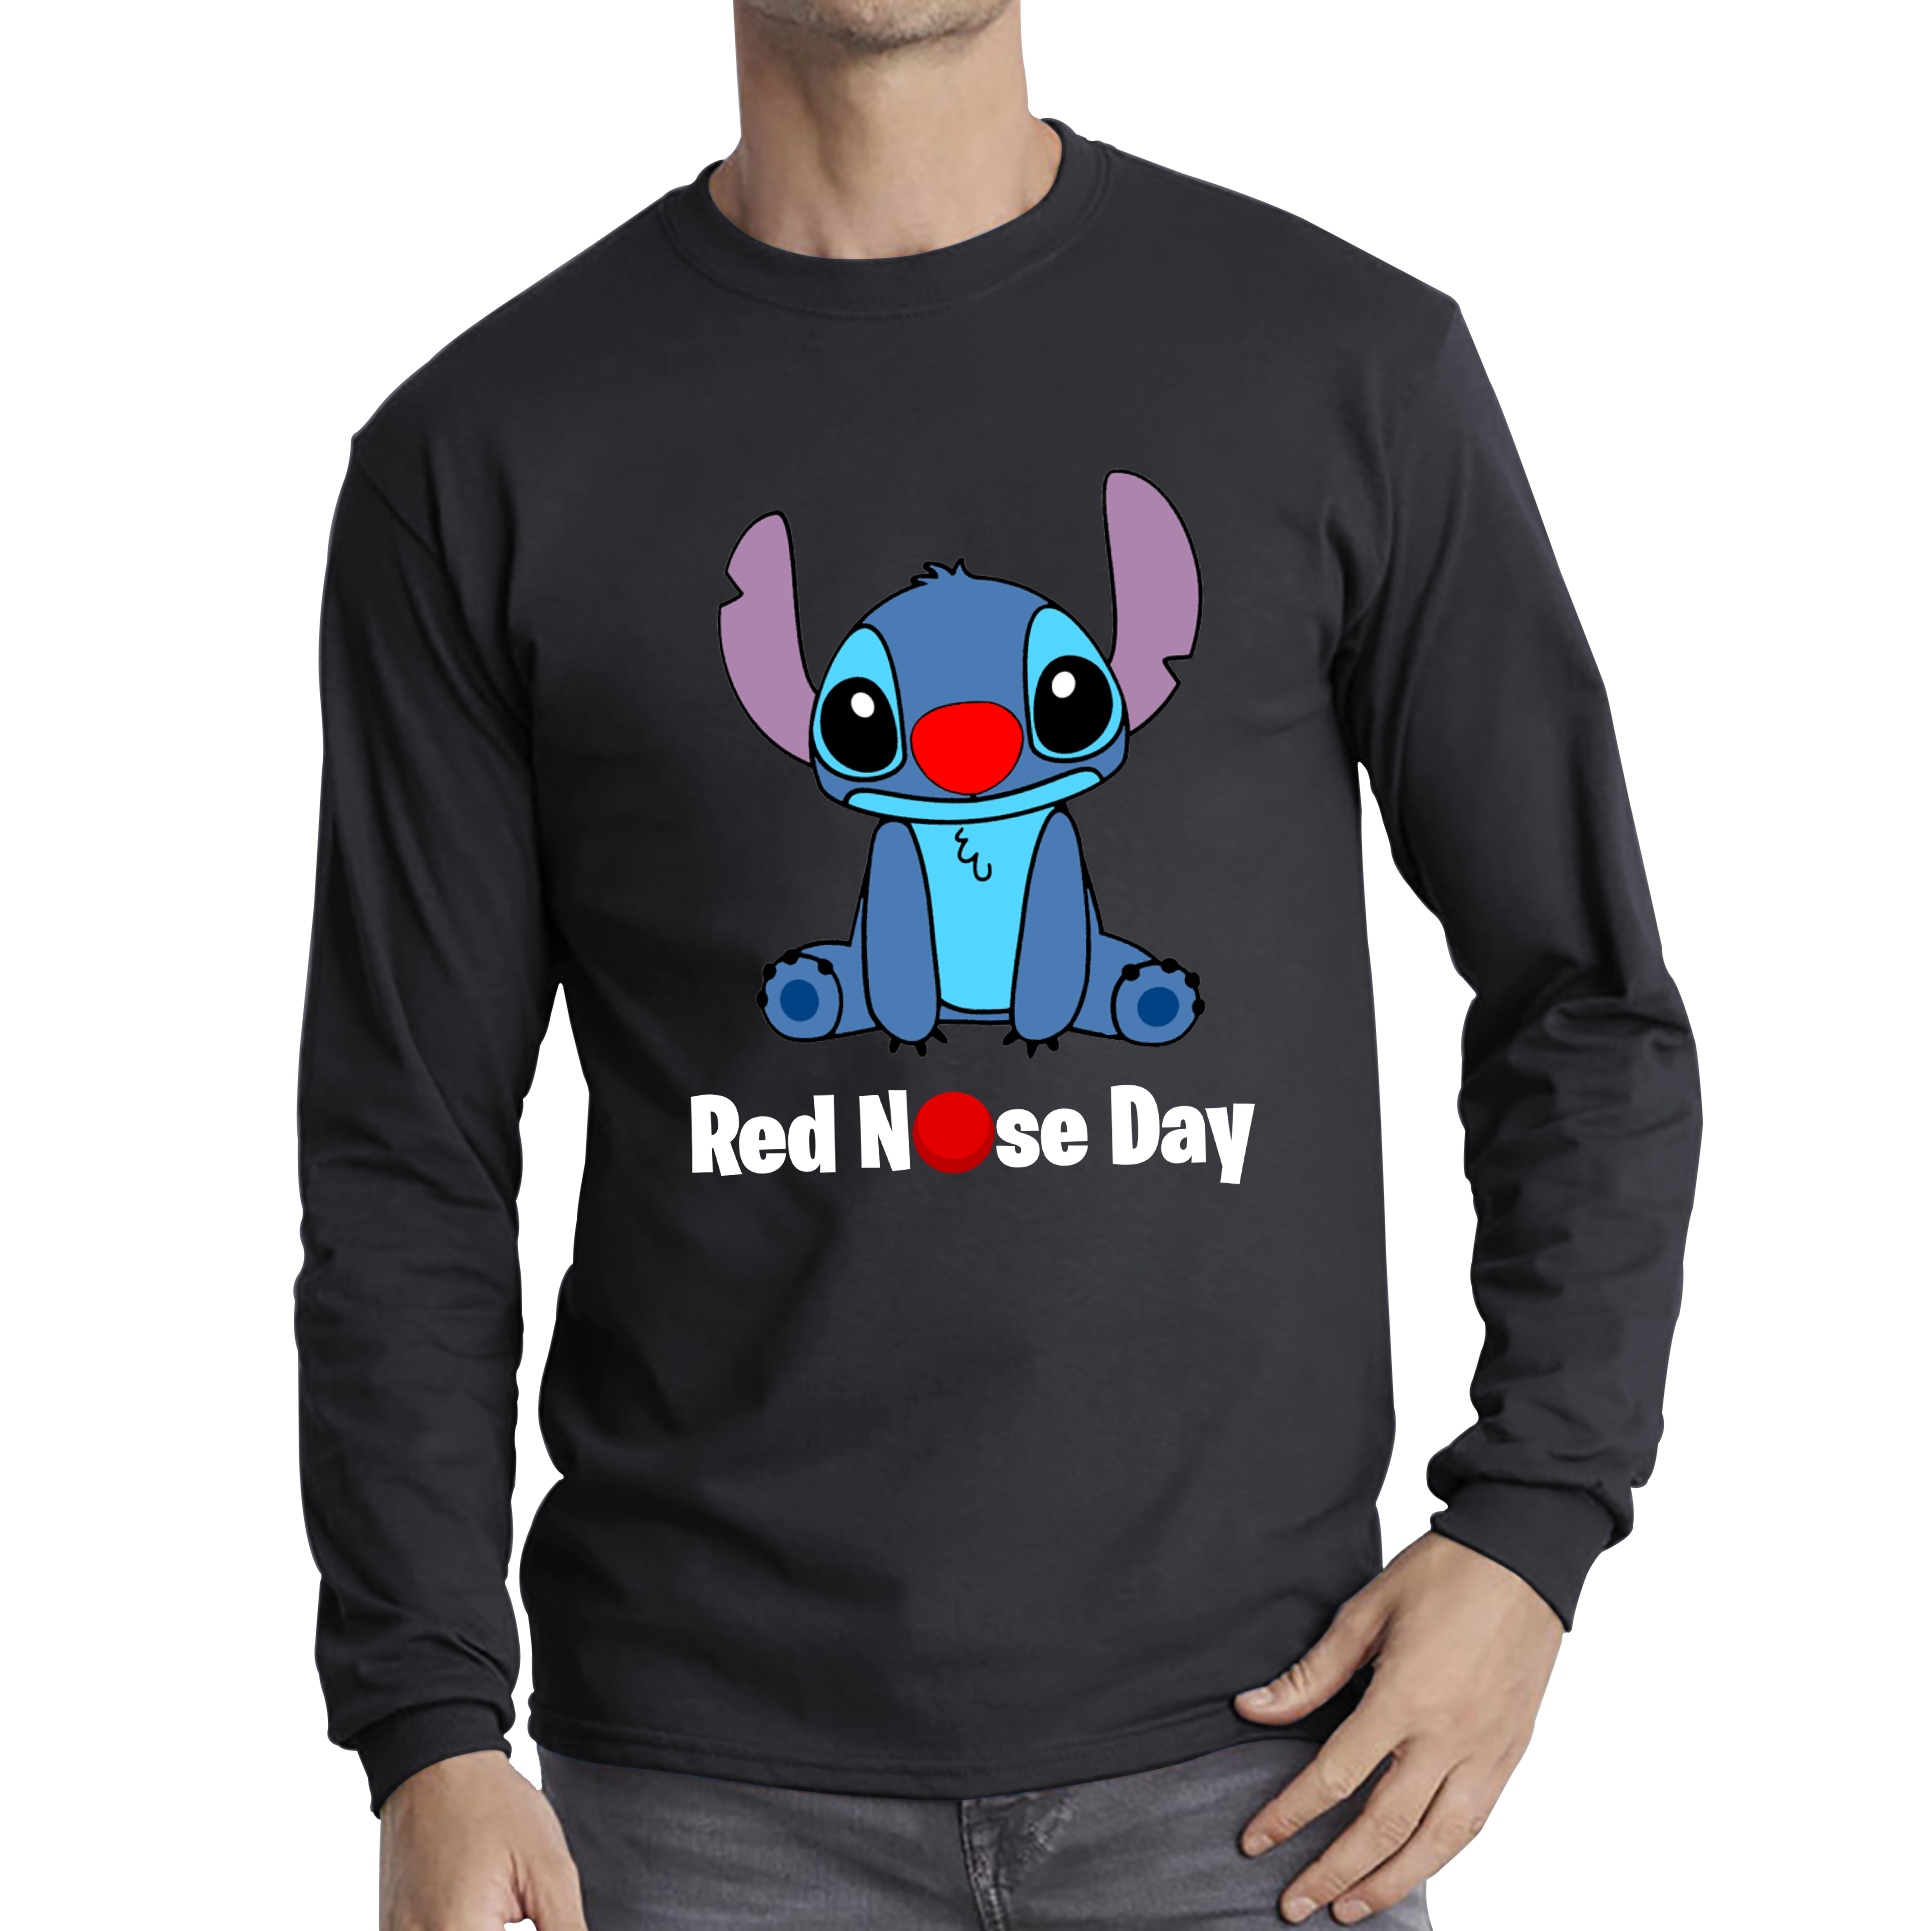 Ohana Disney Stitch Red Nose Day Adult Long Sleeve T Shirt. 50% Goes To Charity